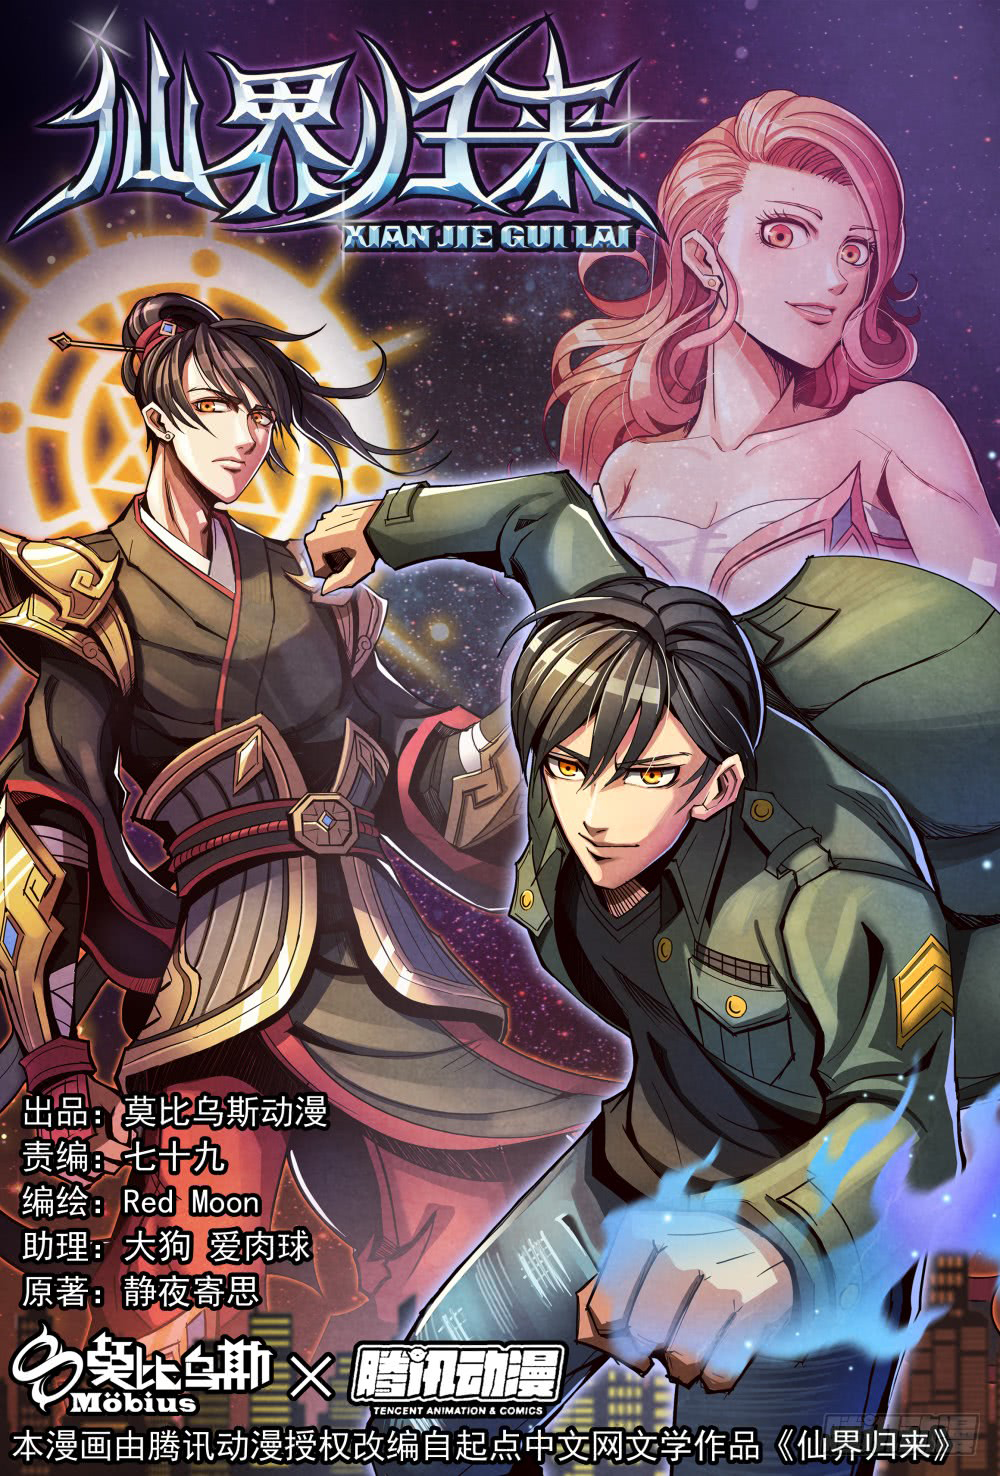 Return From the World of Immortals Vol. 1 Ch. 5 who cares if he lives or dies